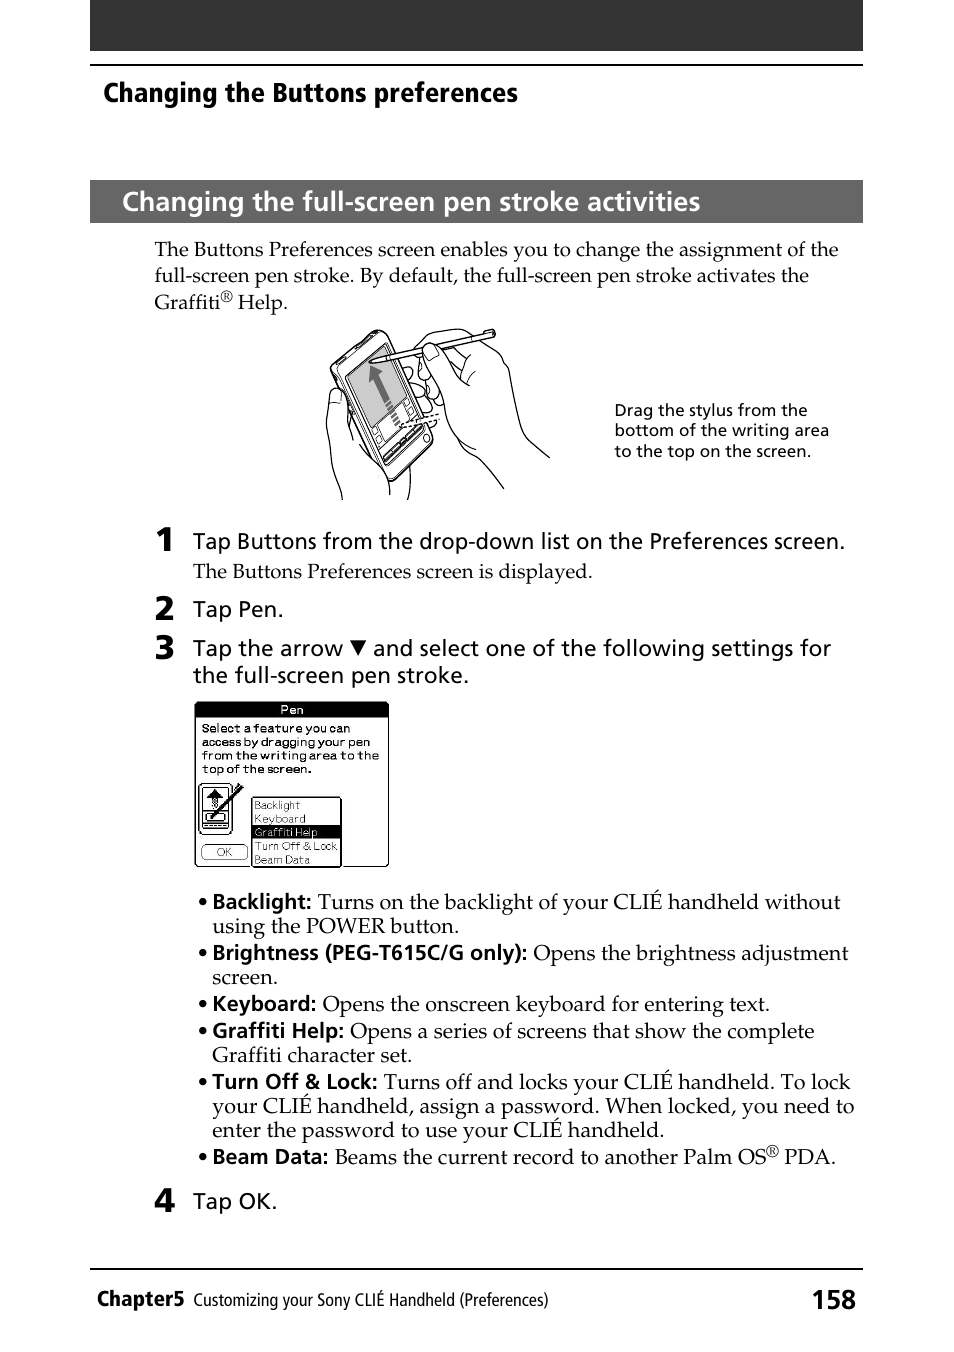 Changing the full-screen pen stroke activities | Sony PEG-T415G User Manual | Page 158 / 220